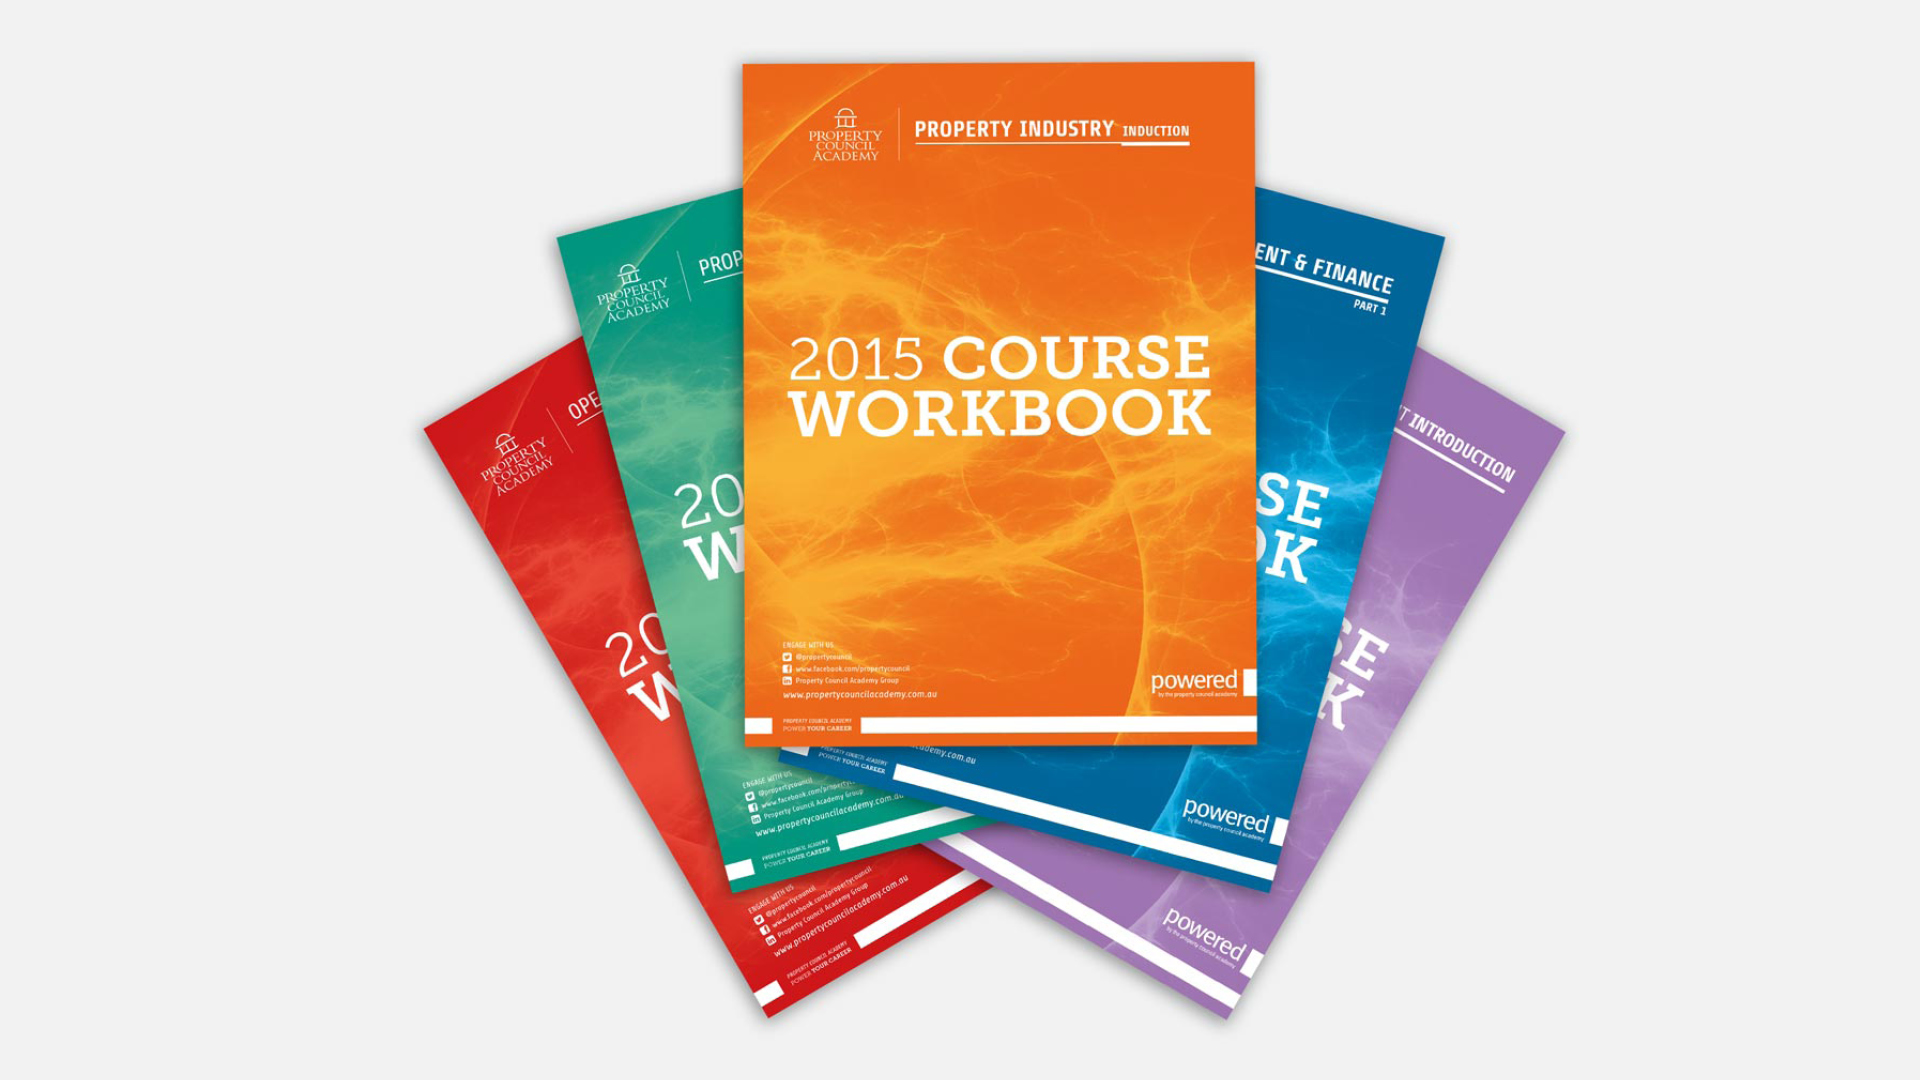 Property Council Academy Courses Collateral 2015 by Think4